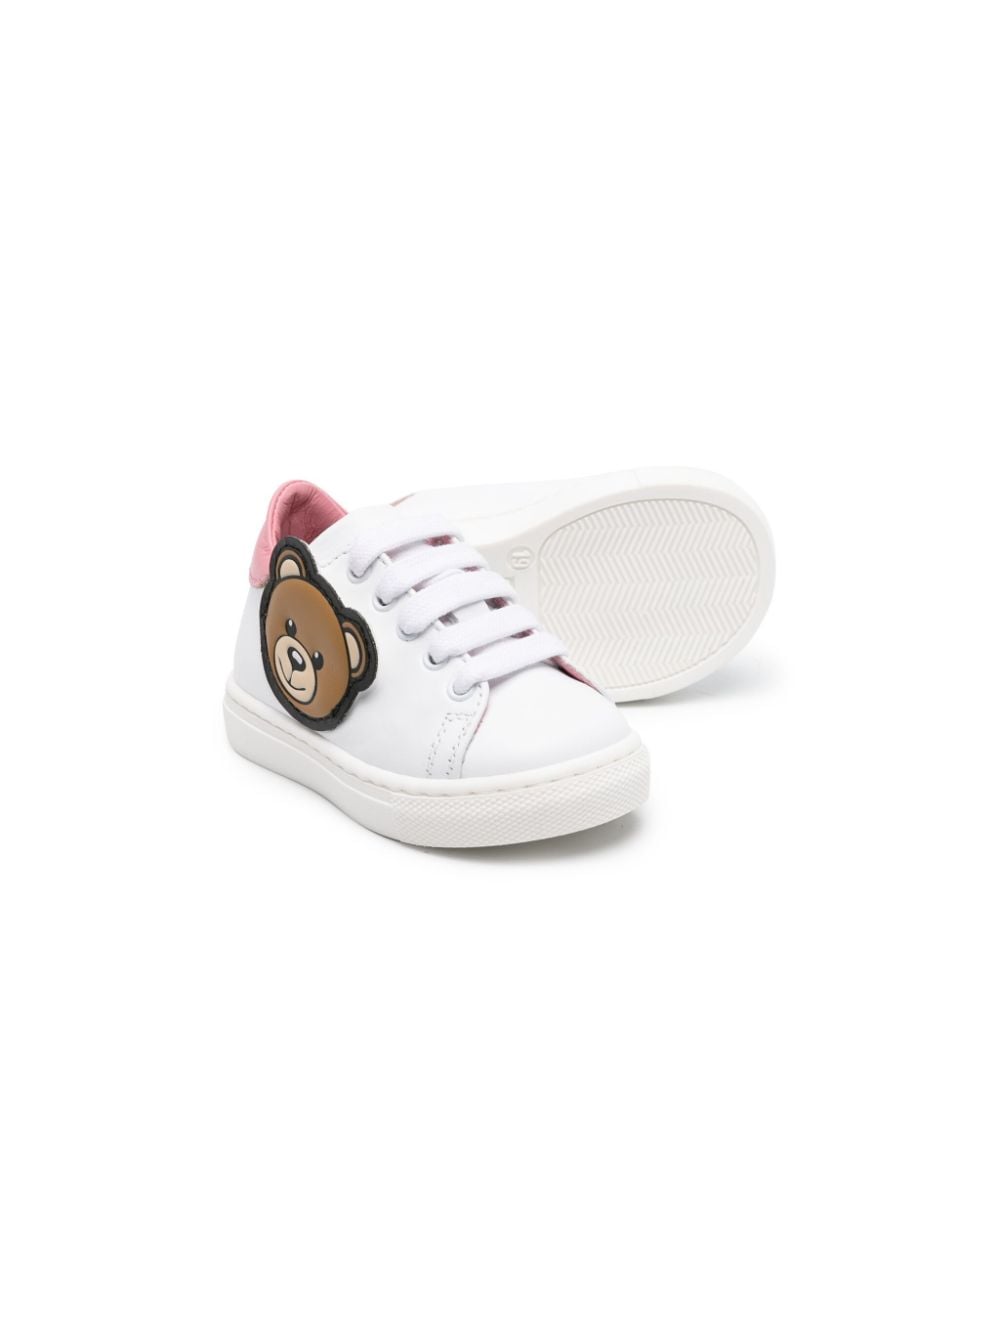 Moschino Kids Teddy Bear appliqué leather sneakers White